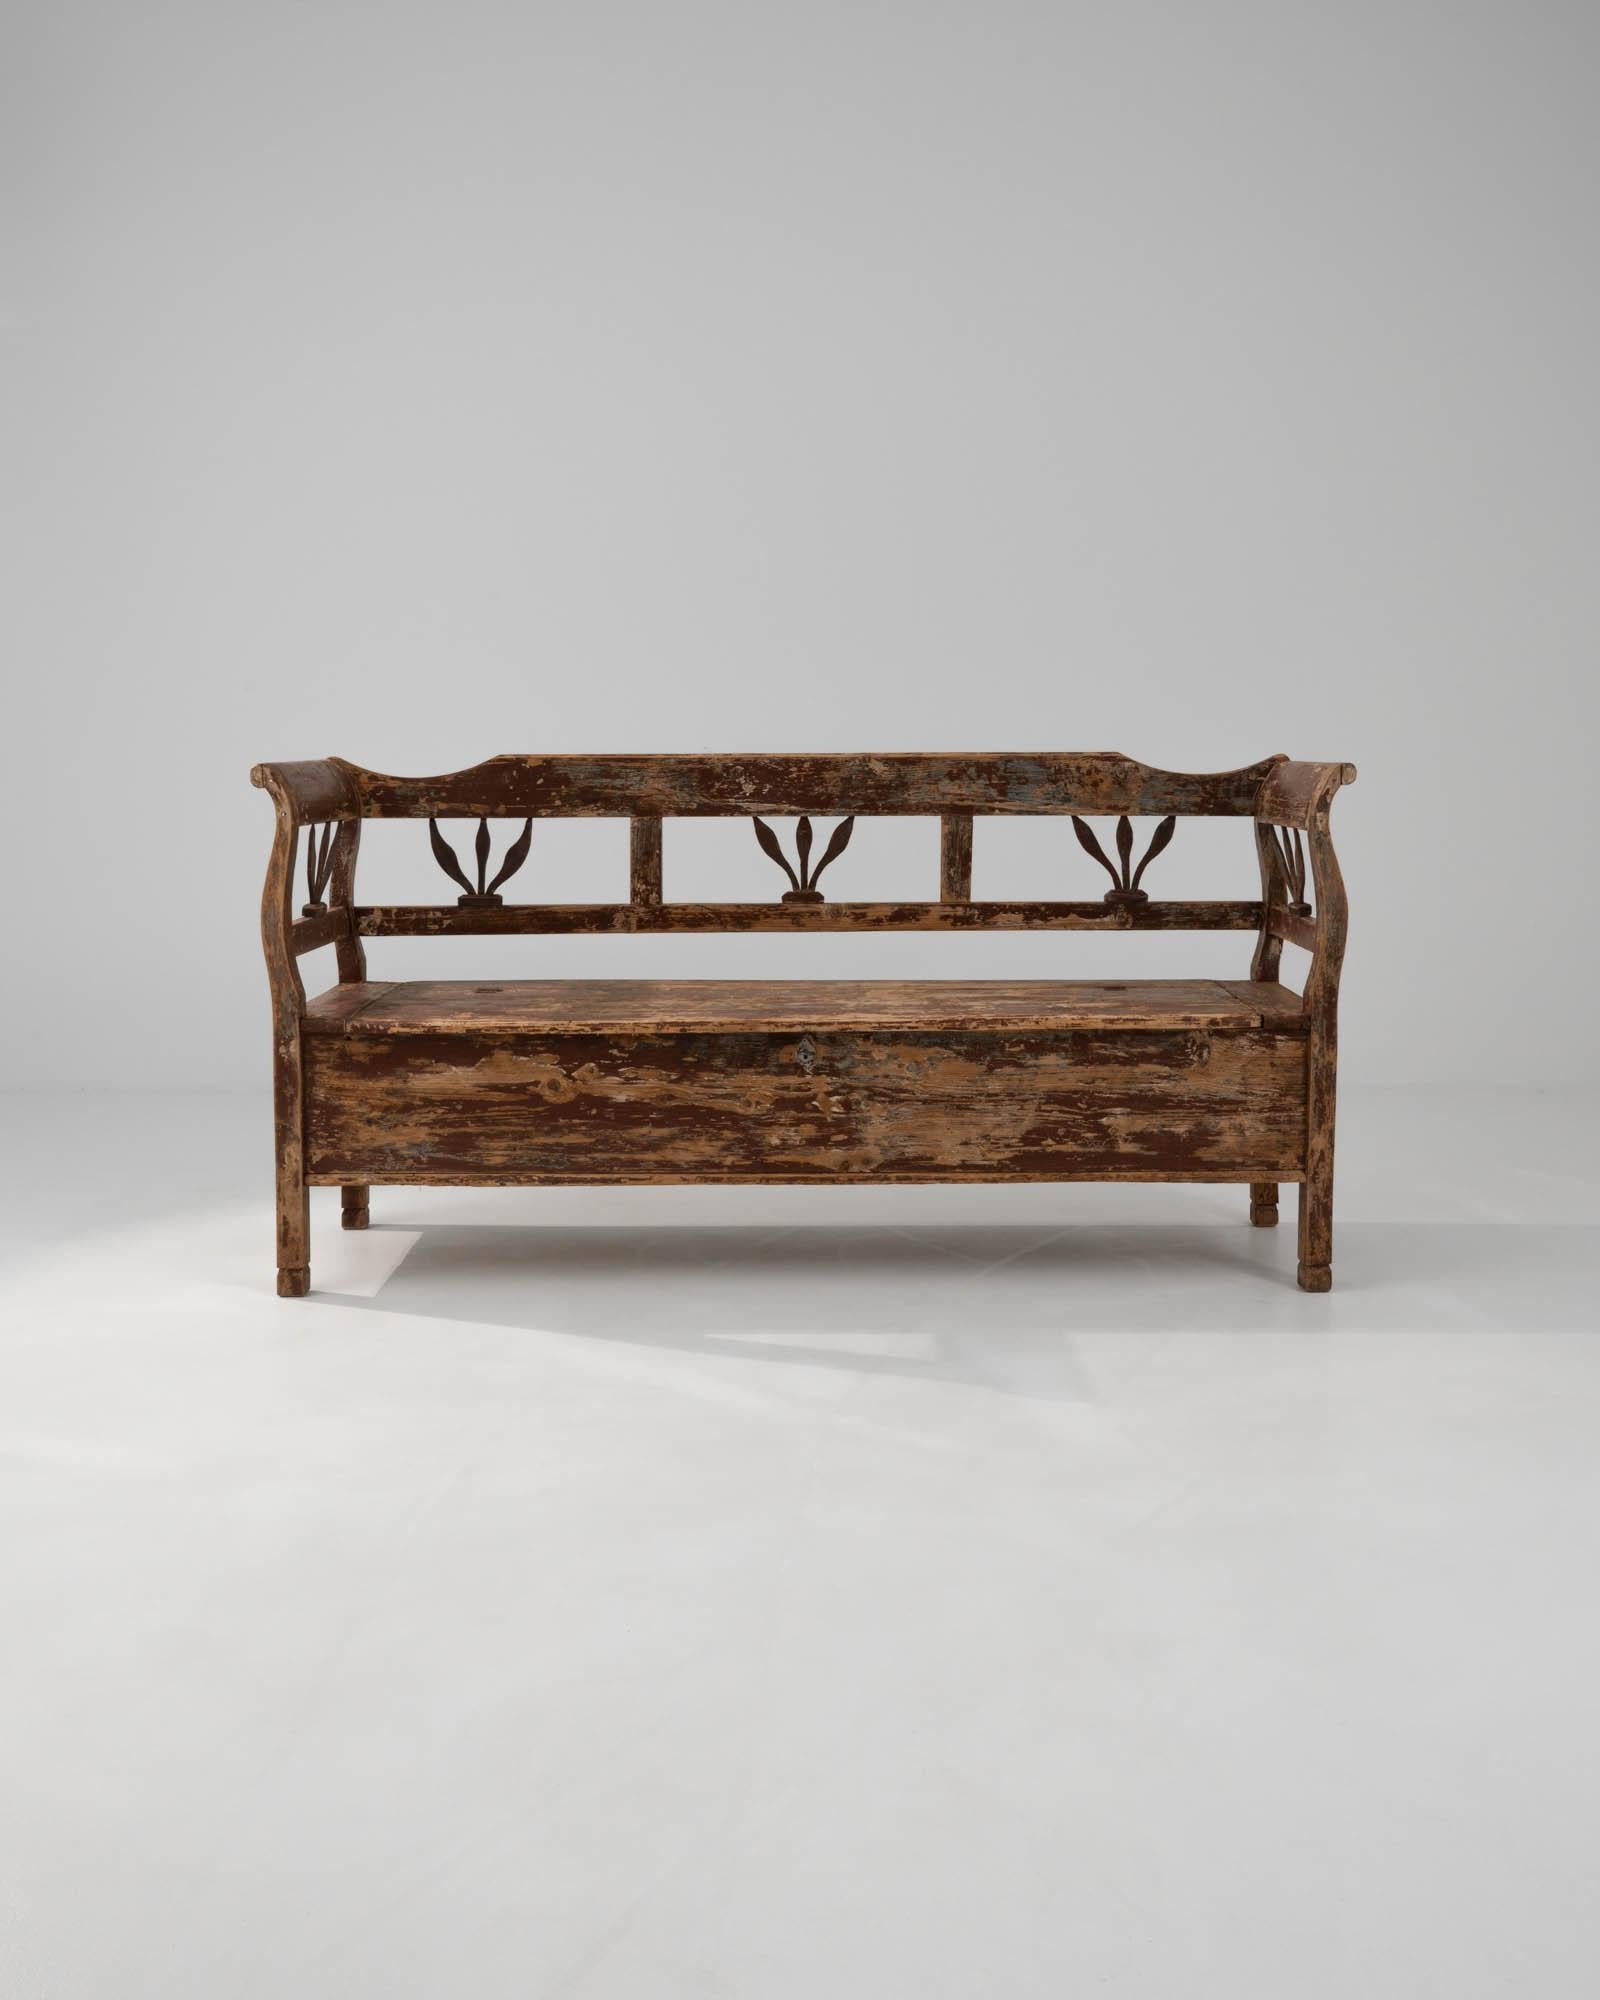 Embrace the rustic charm of history with this 19th Century Central European Wood Patinated Bench. Its beautifully distressed wood tells stories of times past, making it not just a piece of furniture, but a conversation starter. Featuring artfully